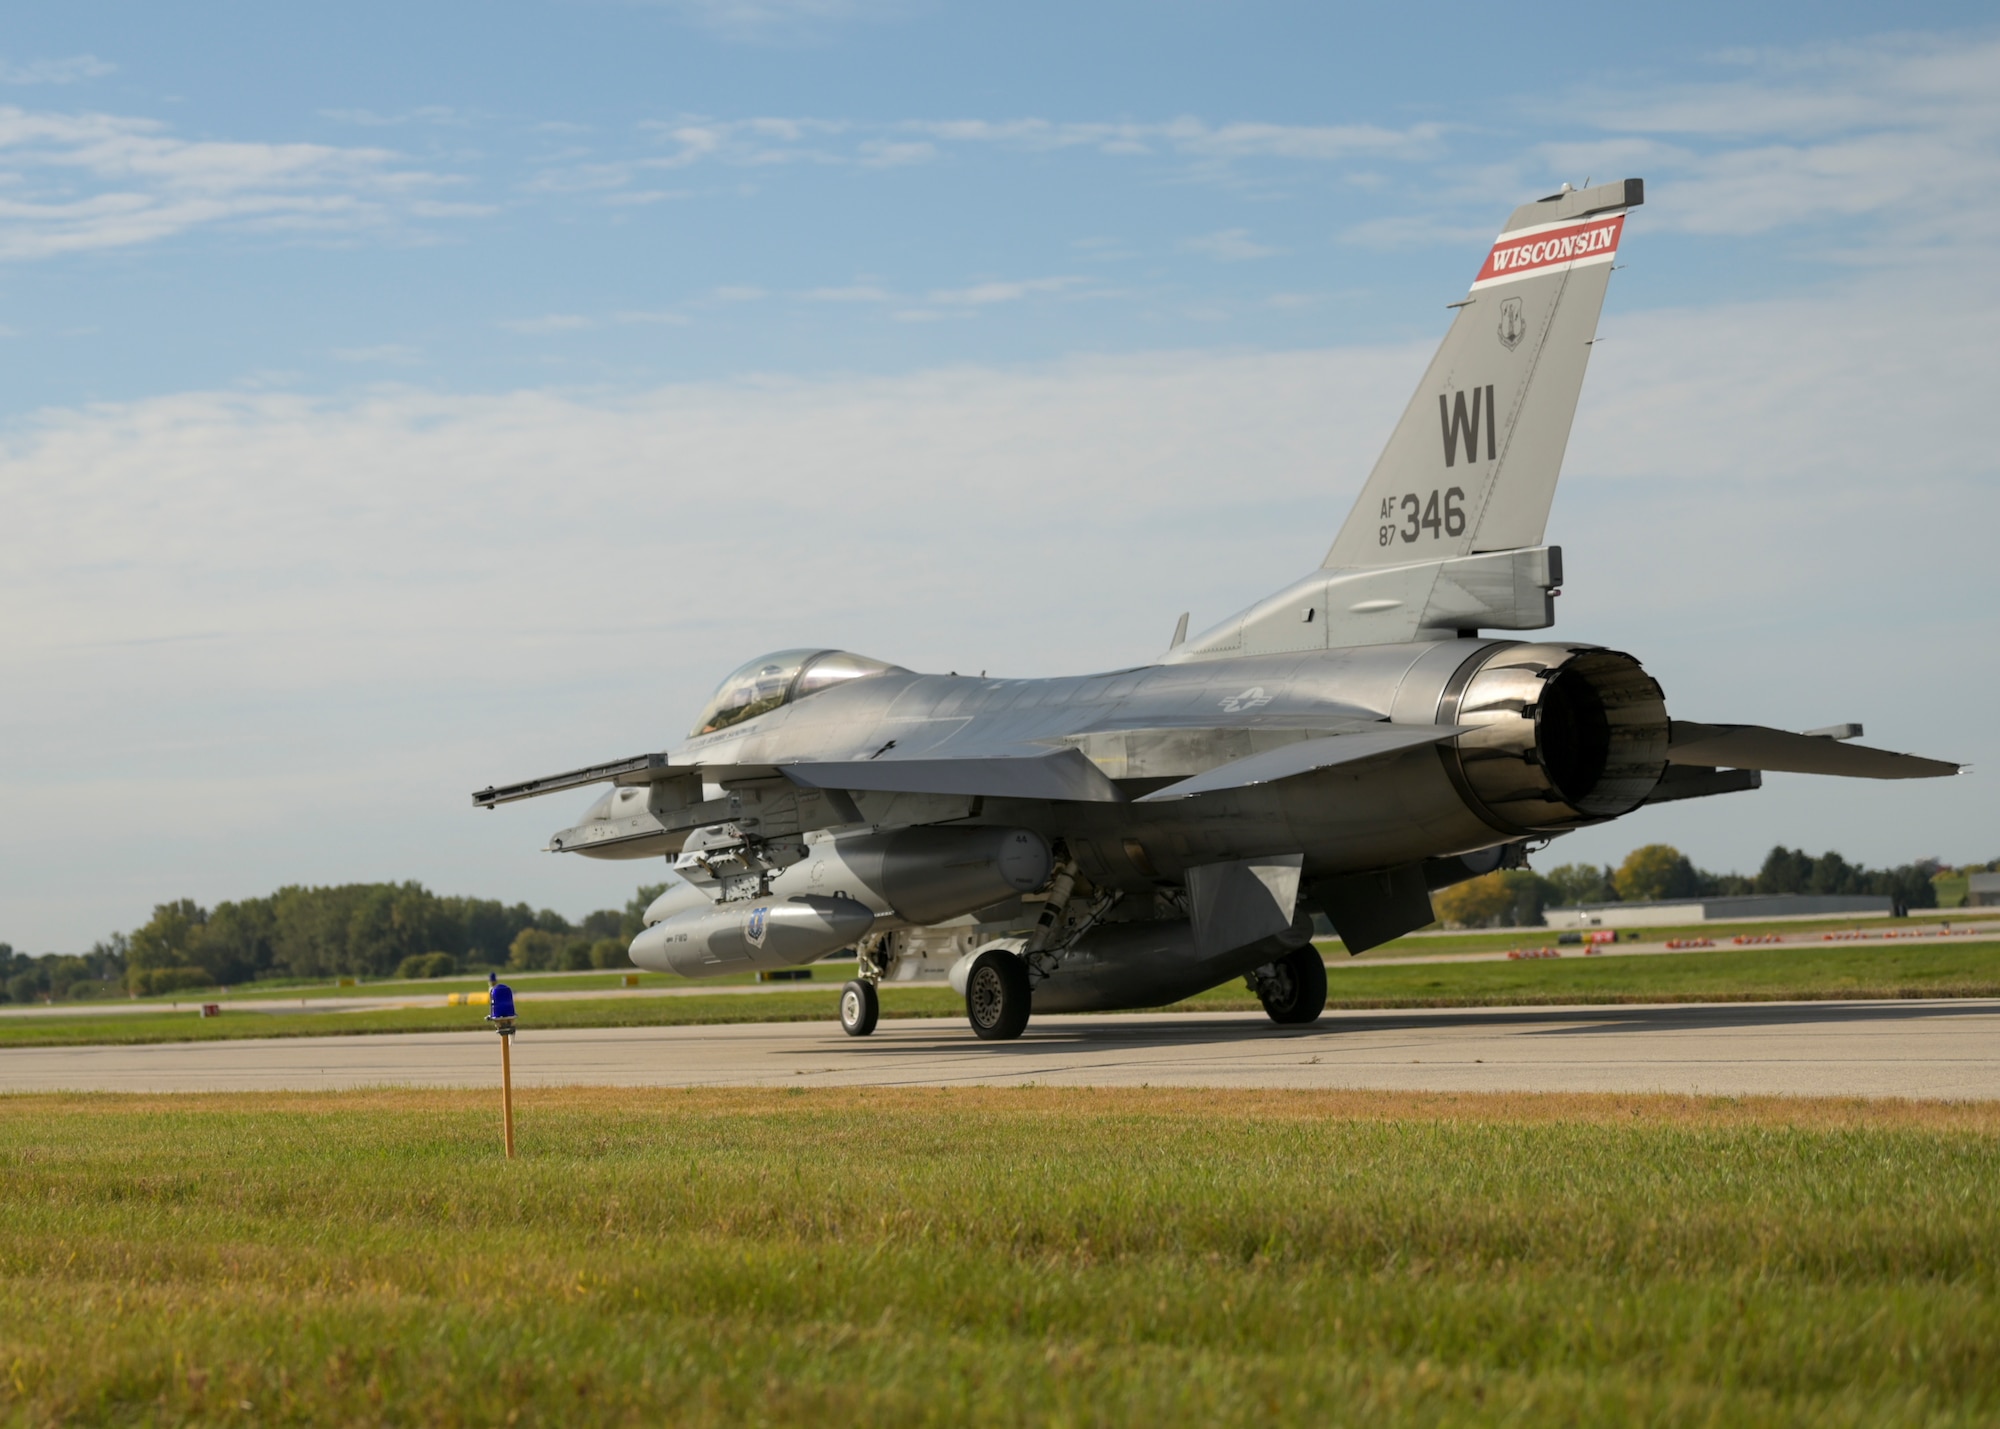 F-16 Fighting Falcon aircraft assigned to the Wisconsin Air National Guard's 115th Fighter Wing, overfly Truax Field, Madison, Wisconsin during a ceremony commemorating the units final departure with the aircraft Oct. 5, 2022. The F-16 first arrived at Truax Field in 1992 as the eighth primary airframe since the units inception in 1948 and is scheduled to be replaced by the F-35 Lightning II aircraft in the Spring of 2023. (U.S. Air National Guard photo by Staff Sgt. Cameron Lewis)